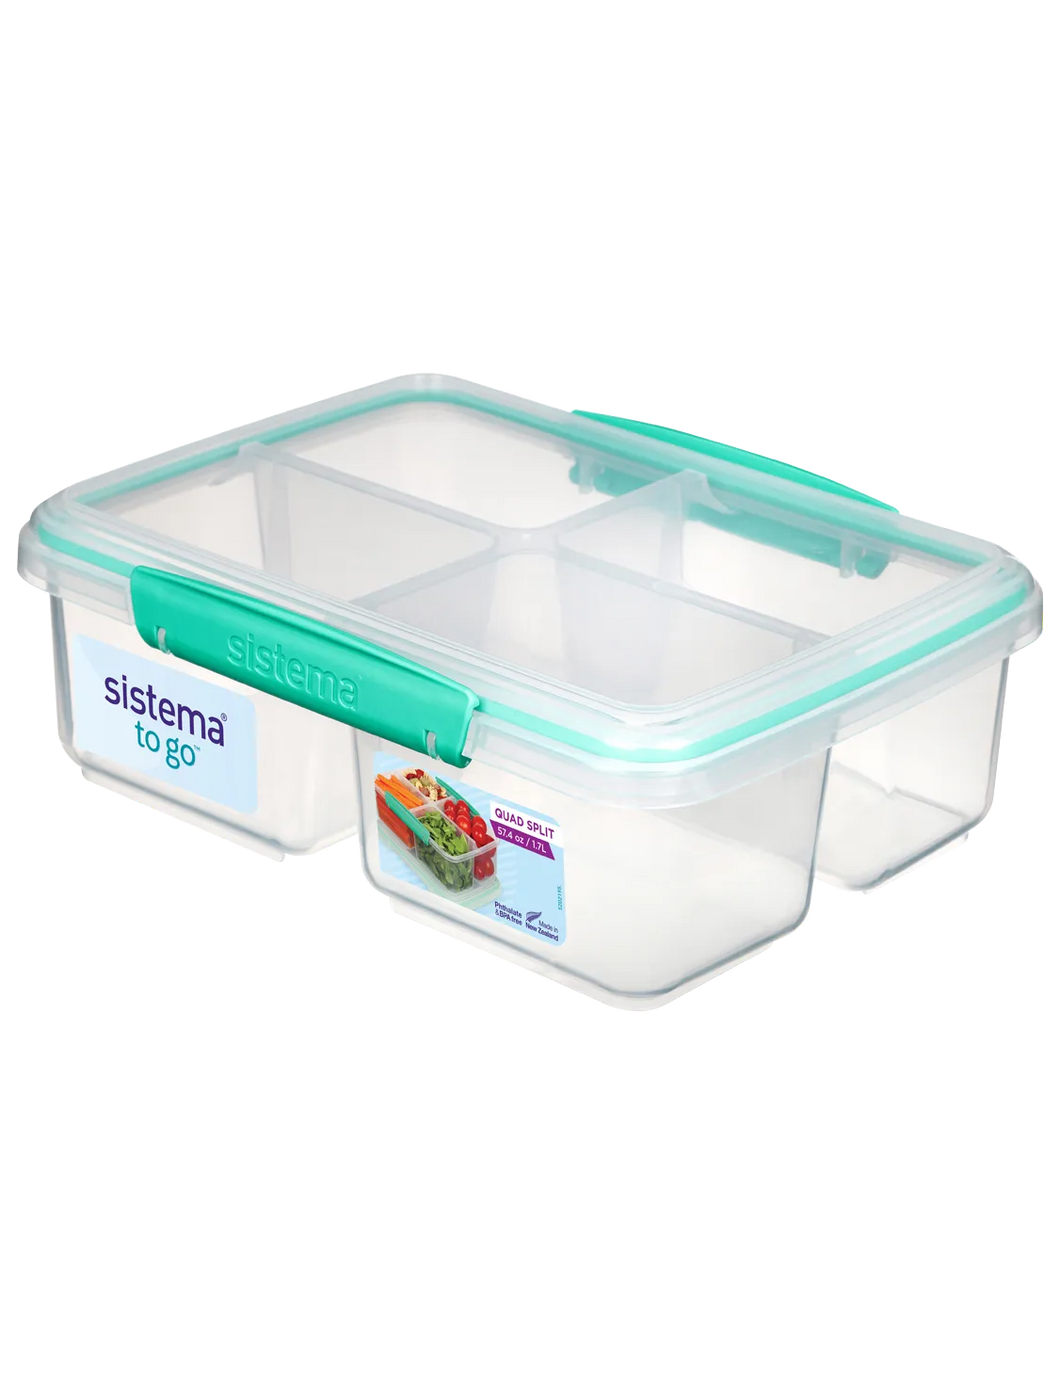 Sistema Quad Split To Go Divided Food Container, 1.7 Liters - Available in Several Colors